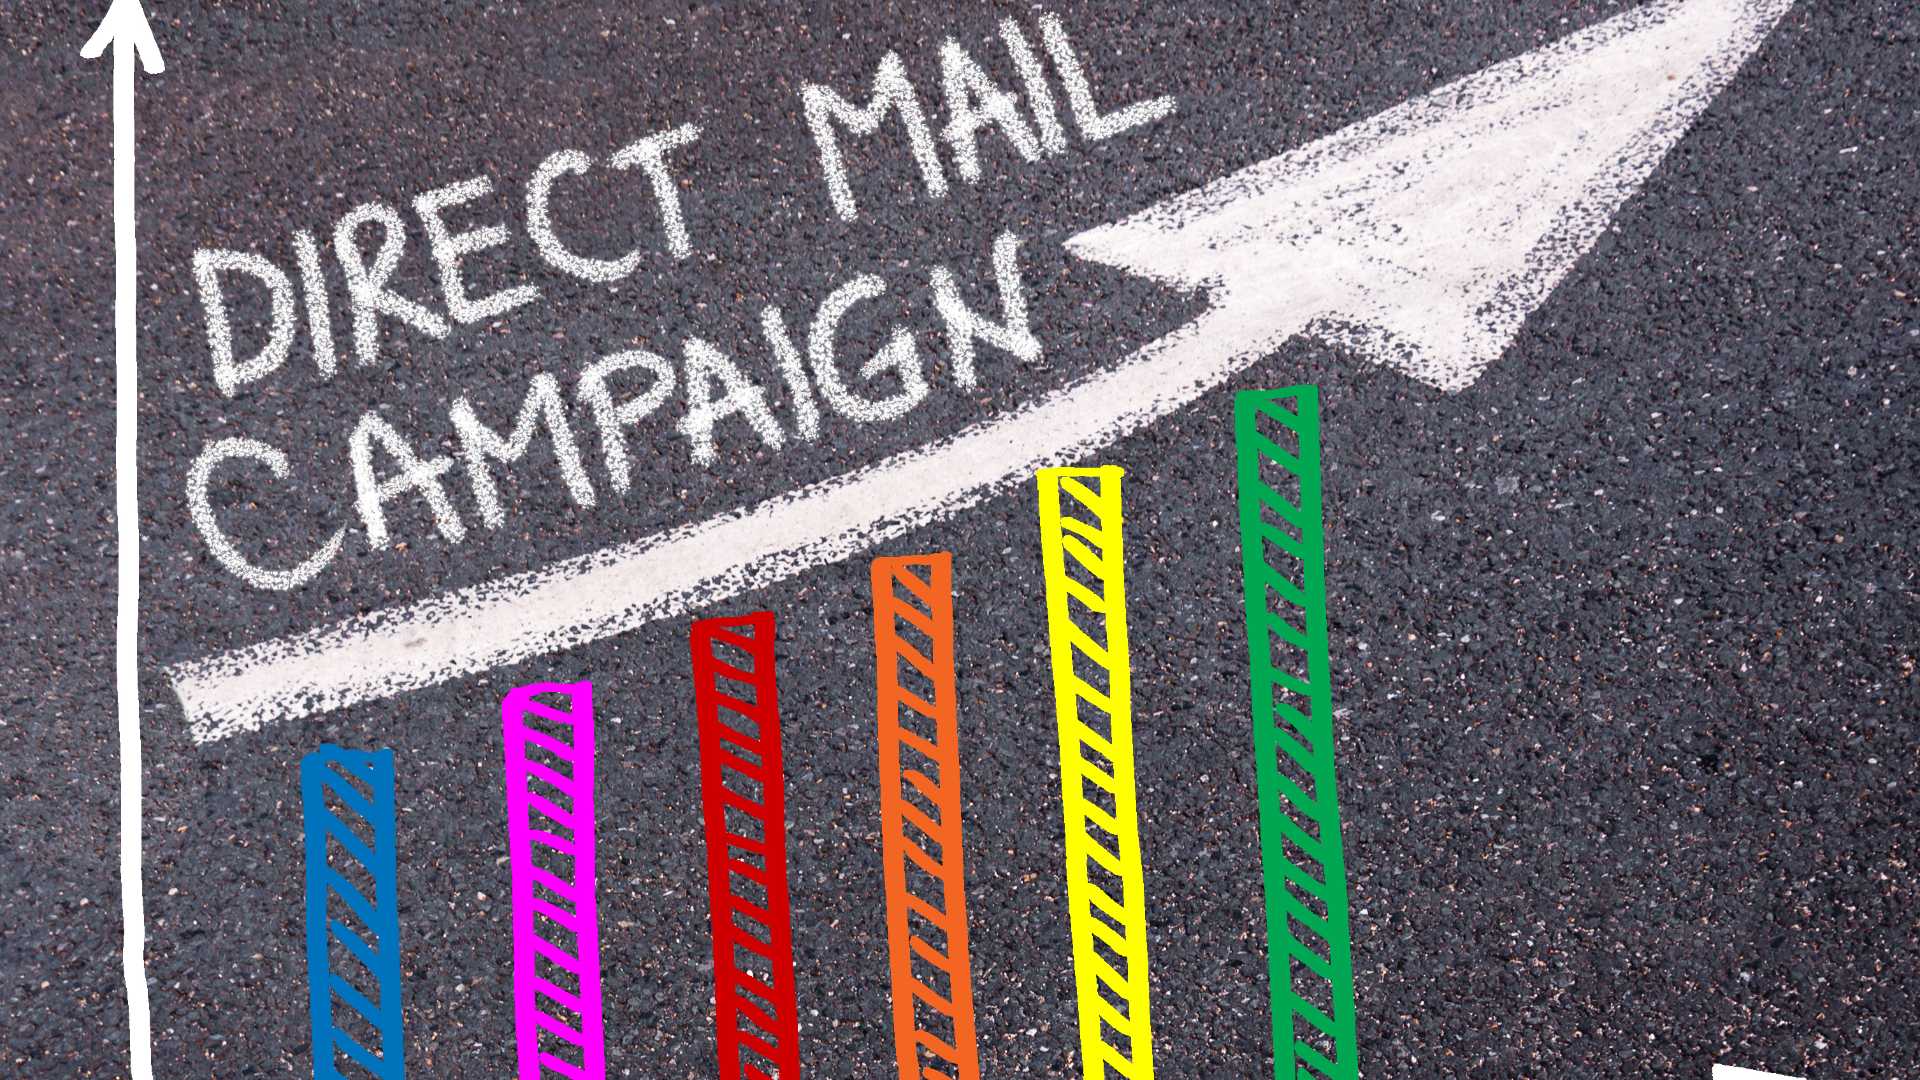 direct mail campaign